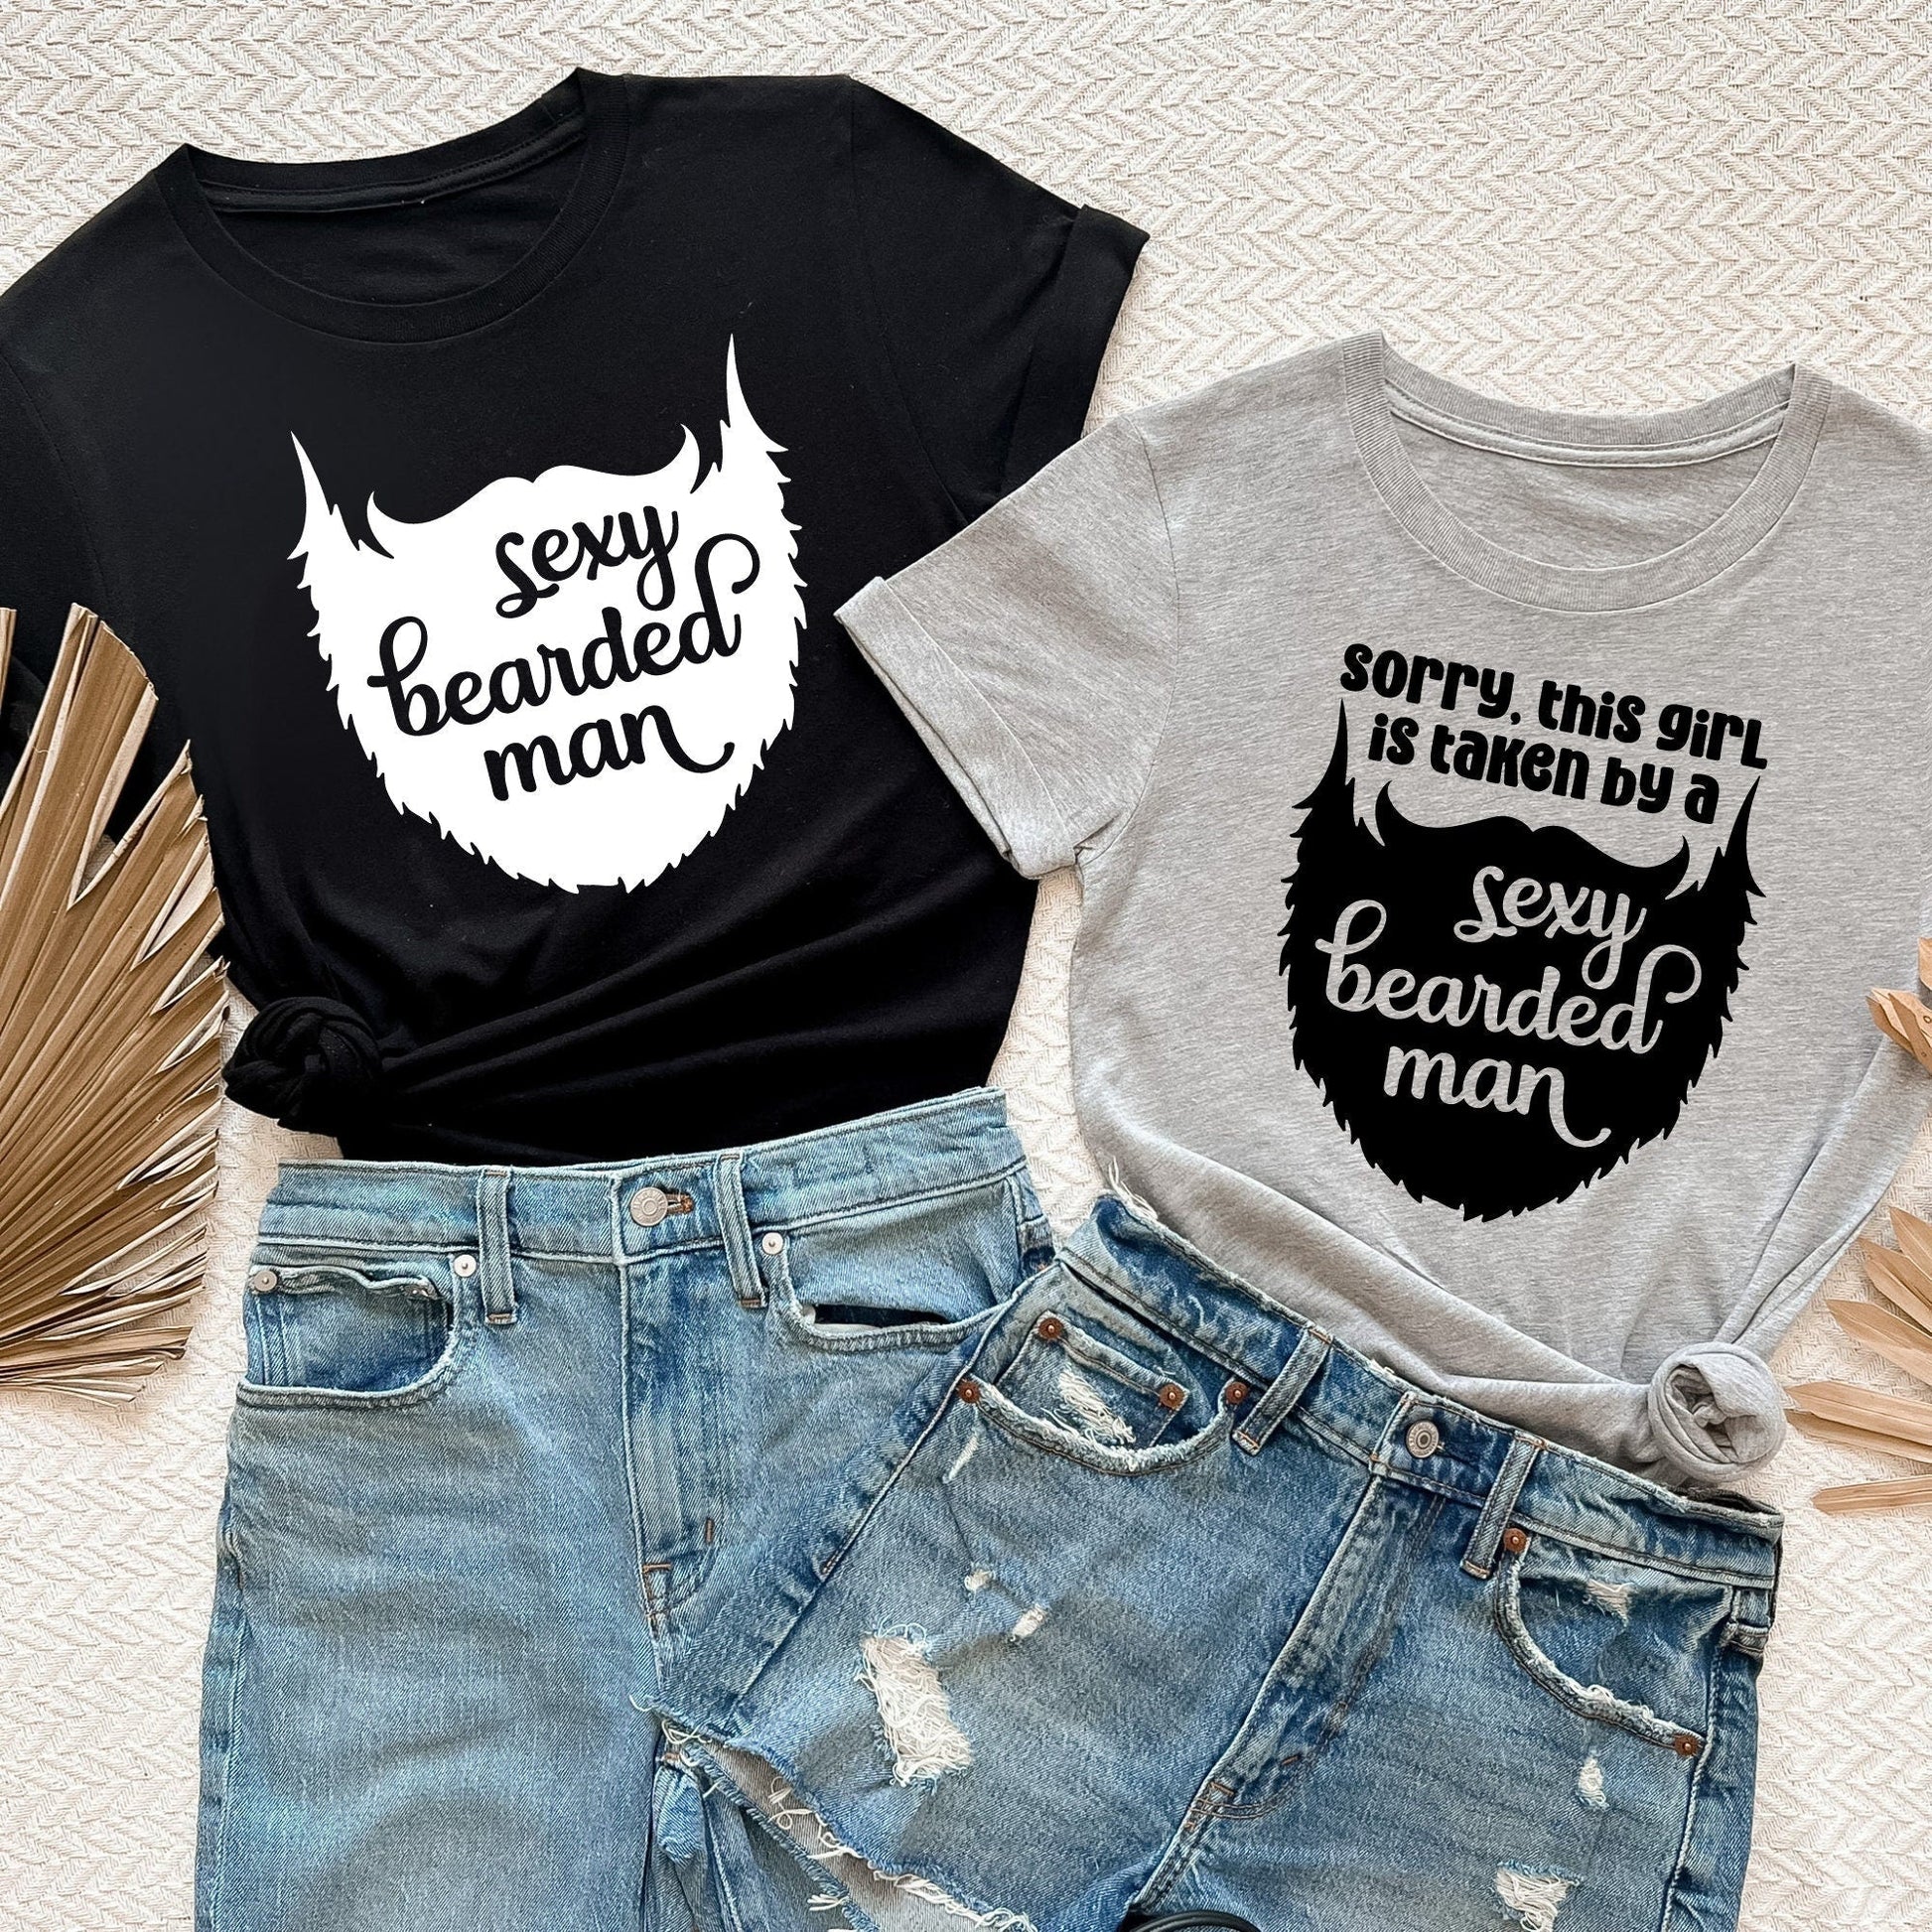 Couples Shirts, Couples gift for boyfriend, Beard Lover Gift, Engagement Announcement Photos, Cute Couples Sweaters/Hoodie, Wedding Present HMDesignStudioUS